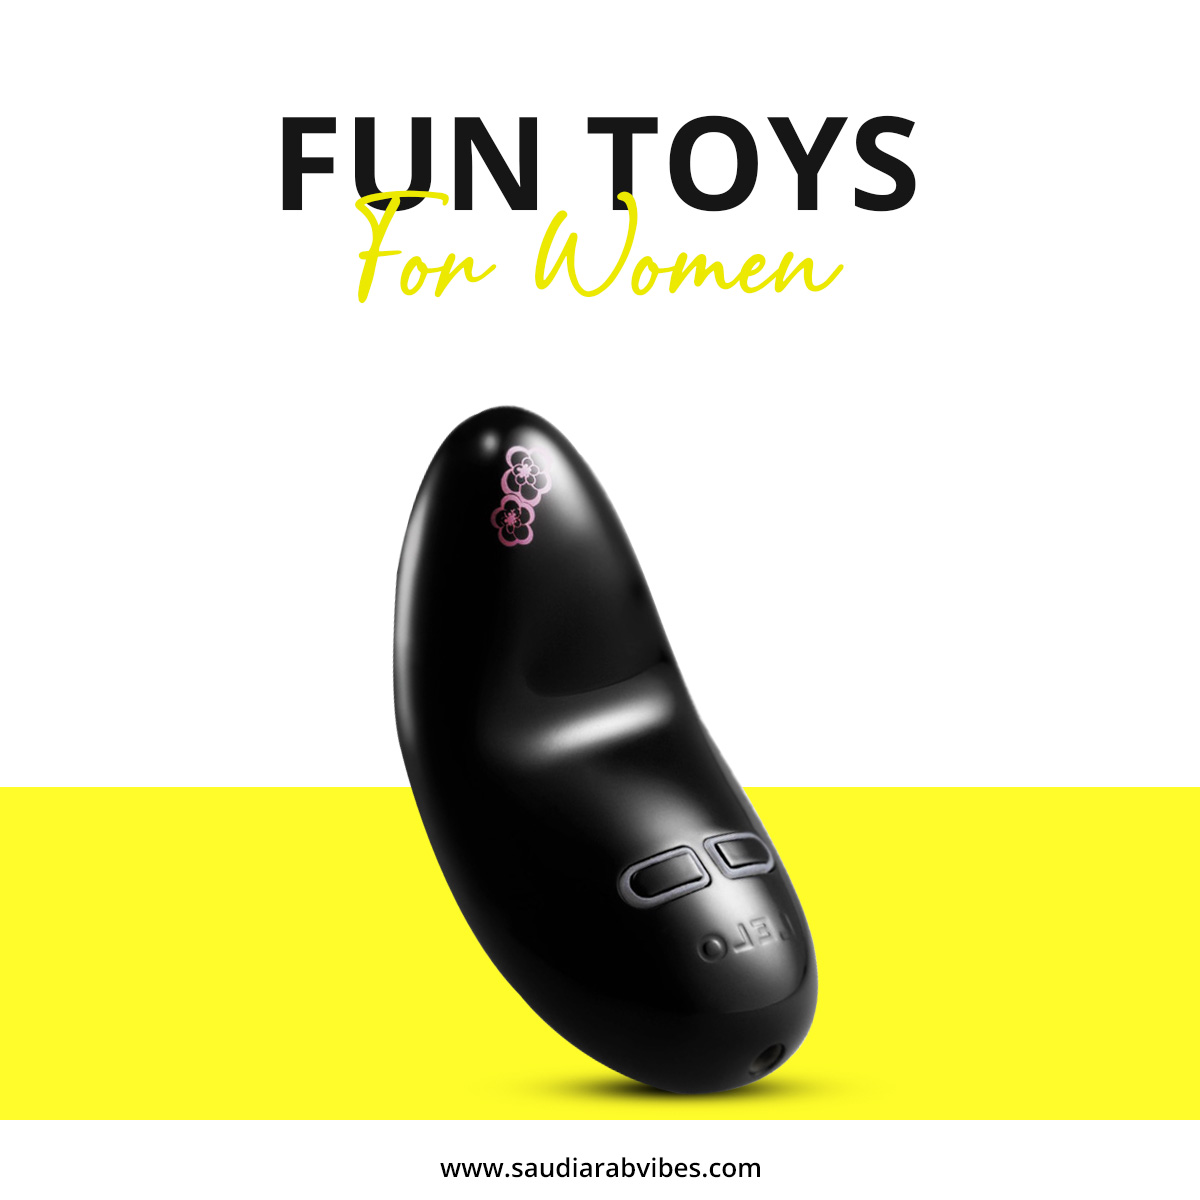 Single press of the vibrator can make me get over all stress and enjoy fantastic climax

Whatsapp: +13236785503

#pleasureproducts #adultproducts #selfpleasure #pleasures #intimacy #love

#selfpleasure #funtoys #pleasureintimicy # adultproducts #maturefun #AdultingAndStuff